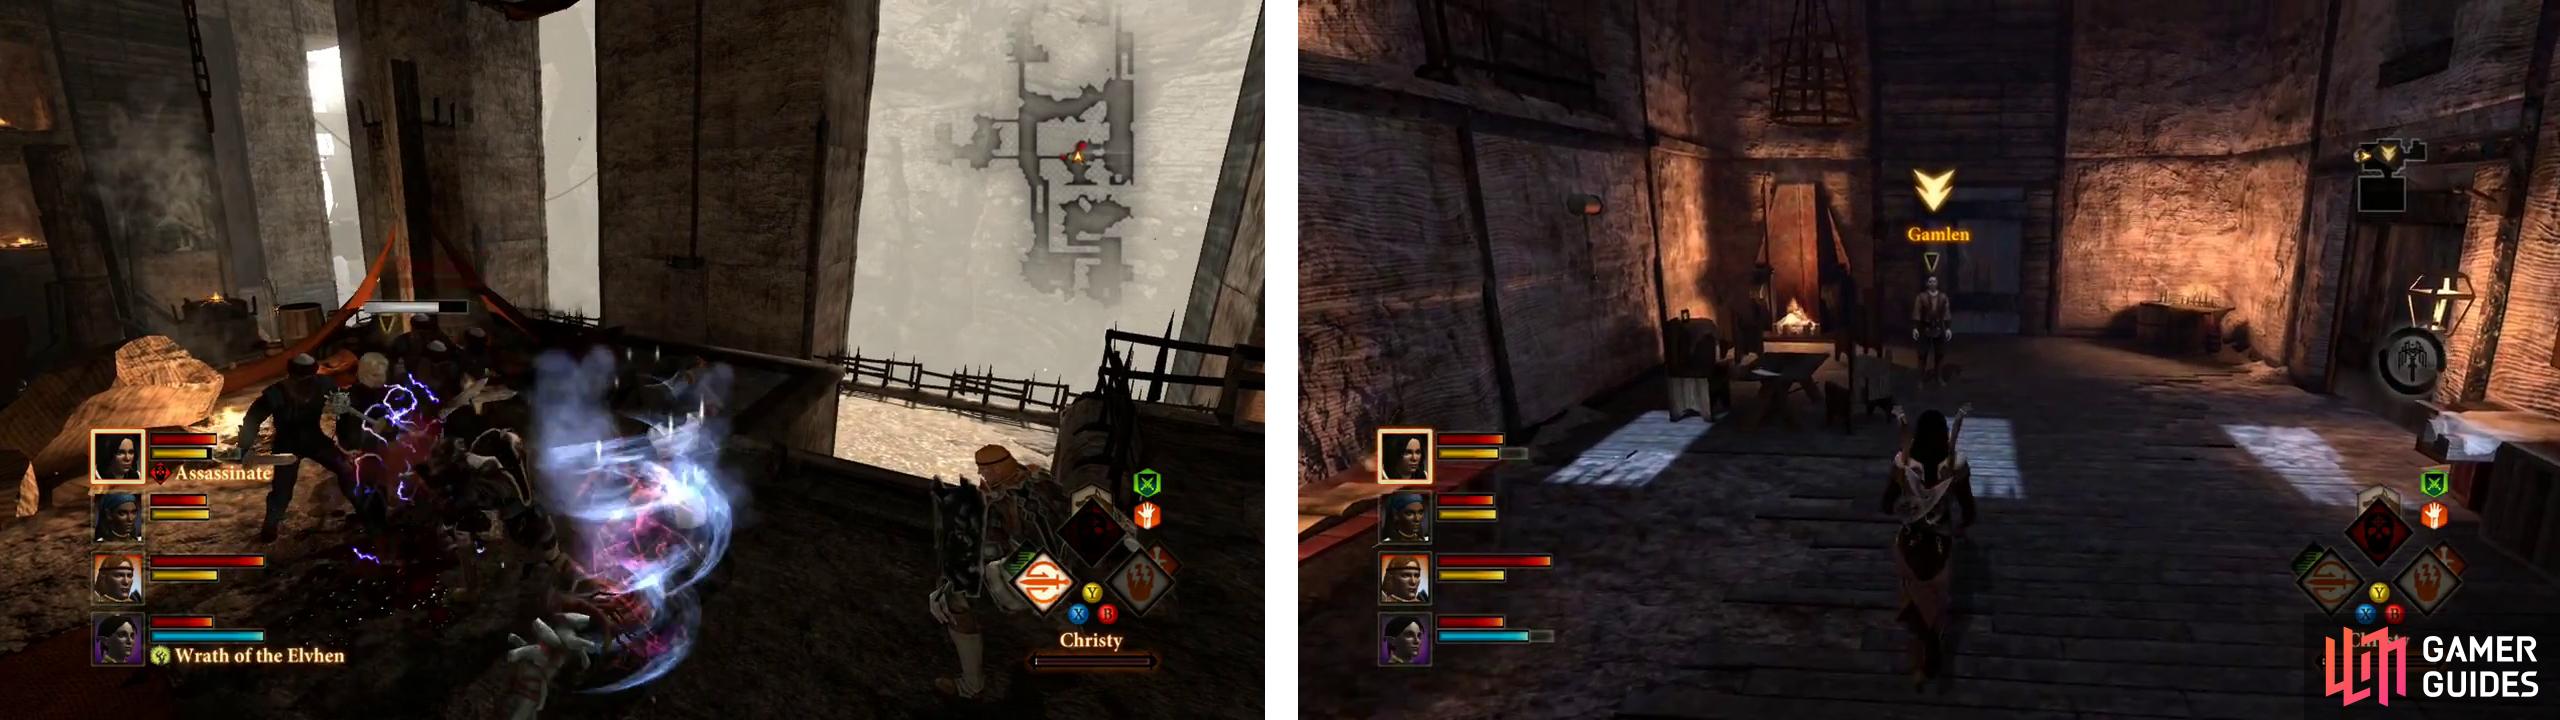 Defeat Mekel and co. (left) and then return to Gamlen (right).